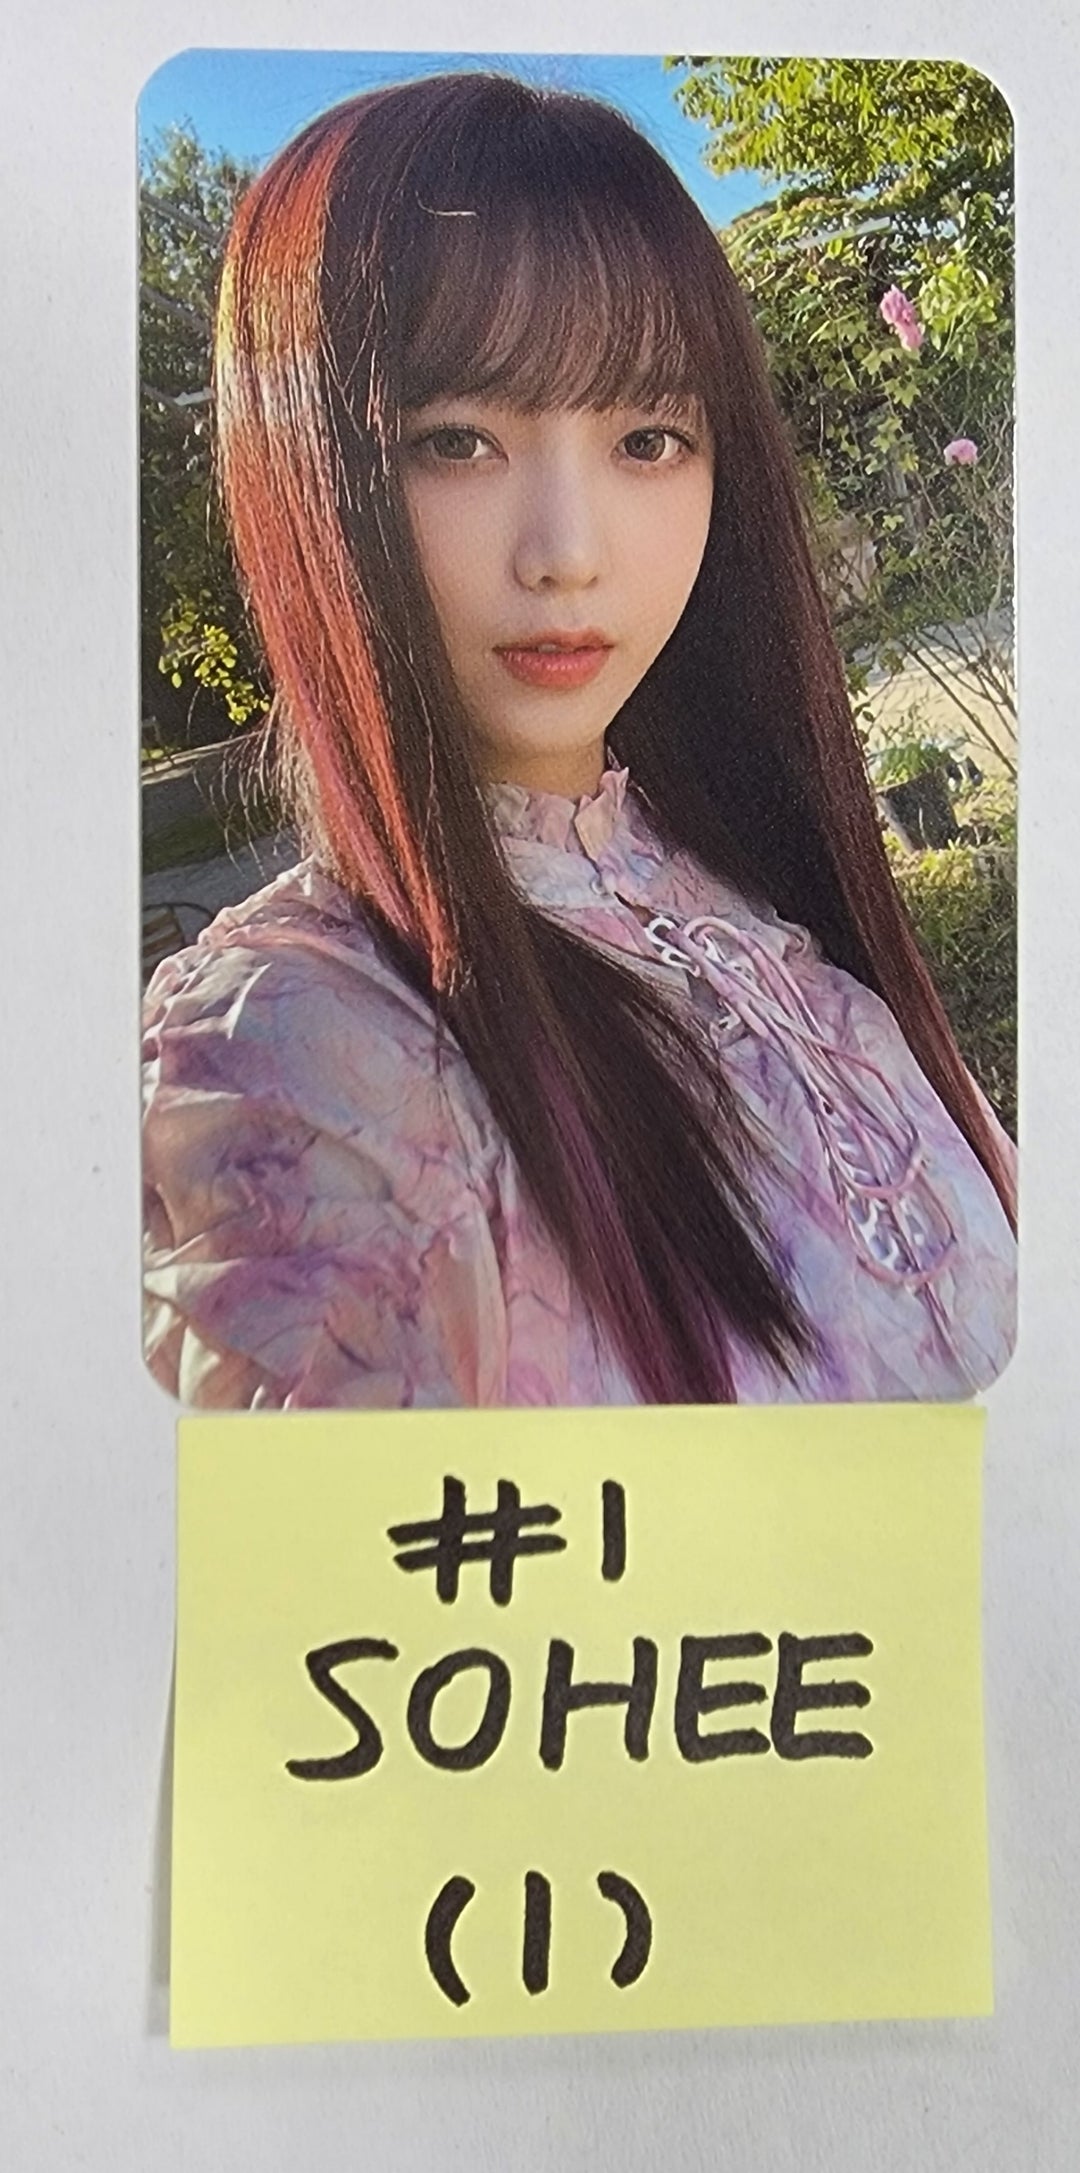 NATURE "NATURE WORLD : CODE W" - Official Photocard, Photo Sticker